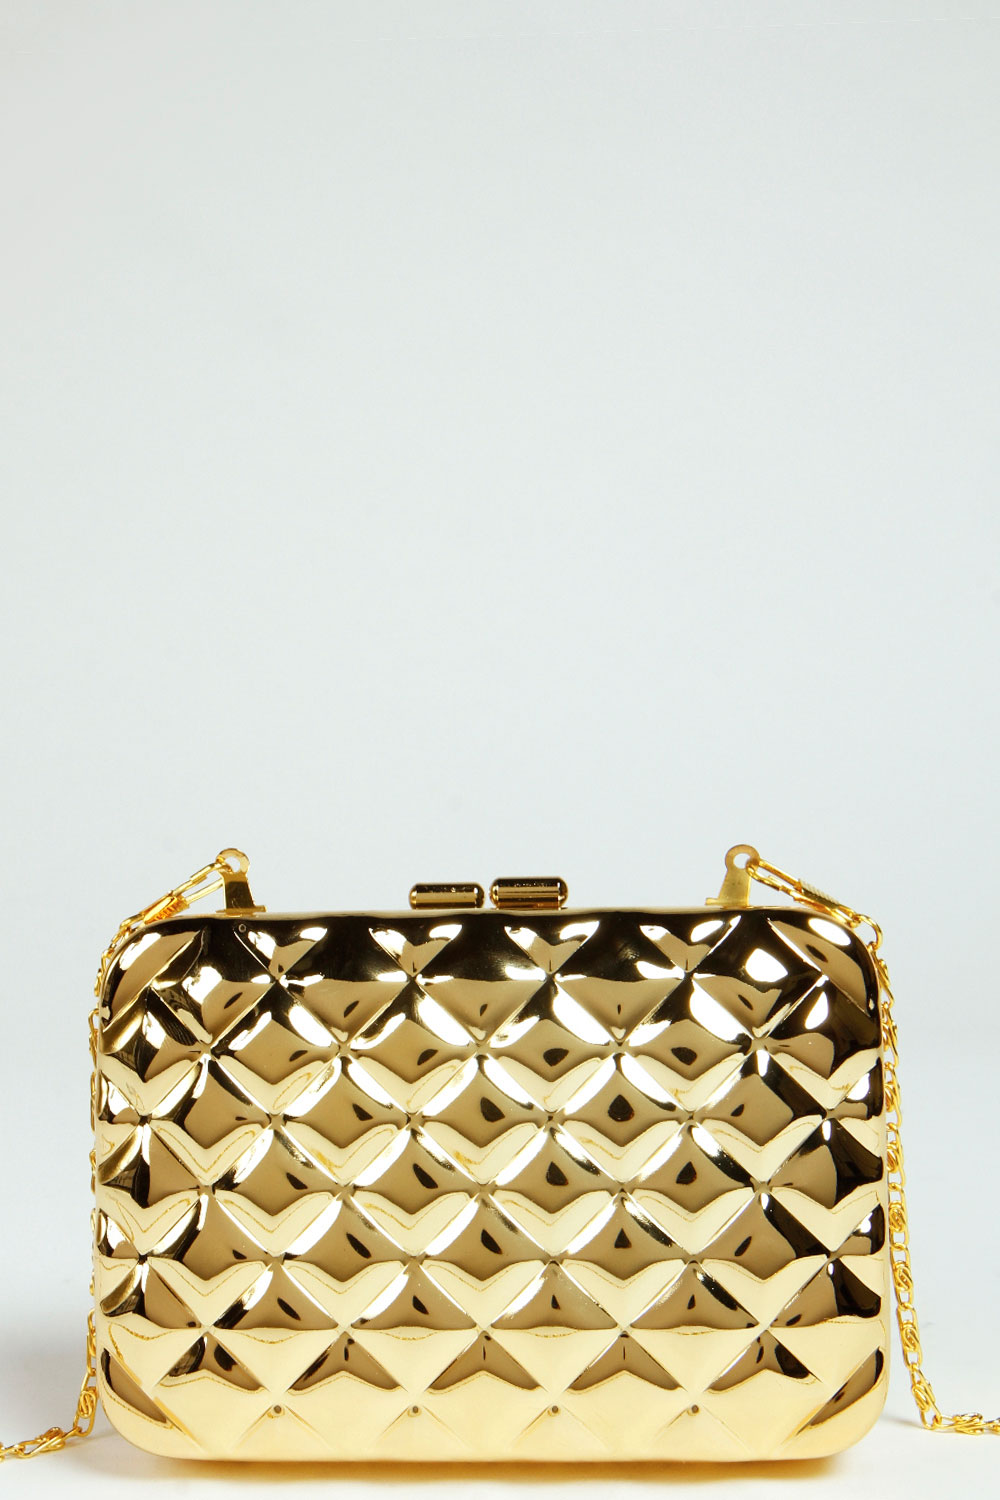 boohoo Jade Quilted Metal Box Clutch Bag - gold